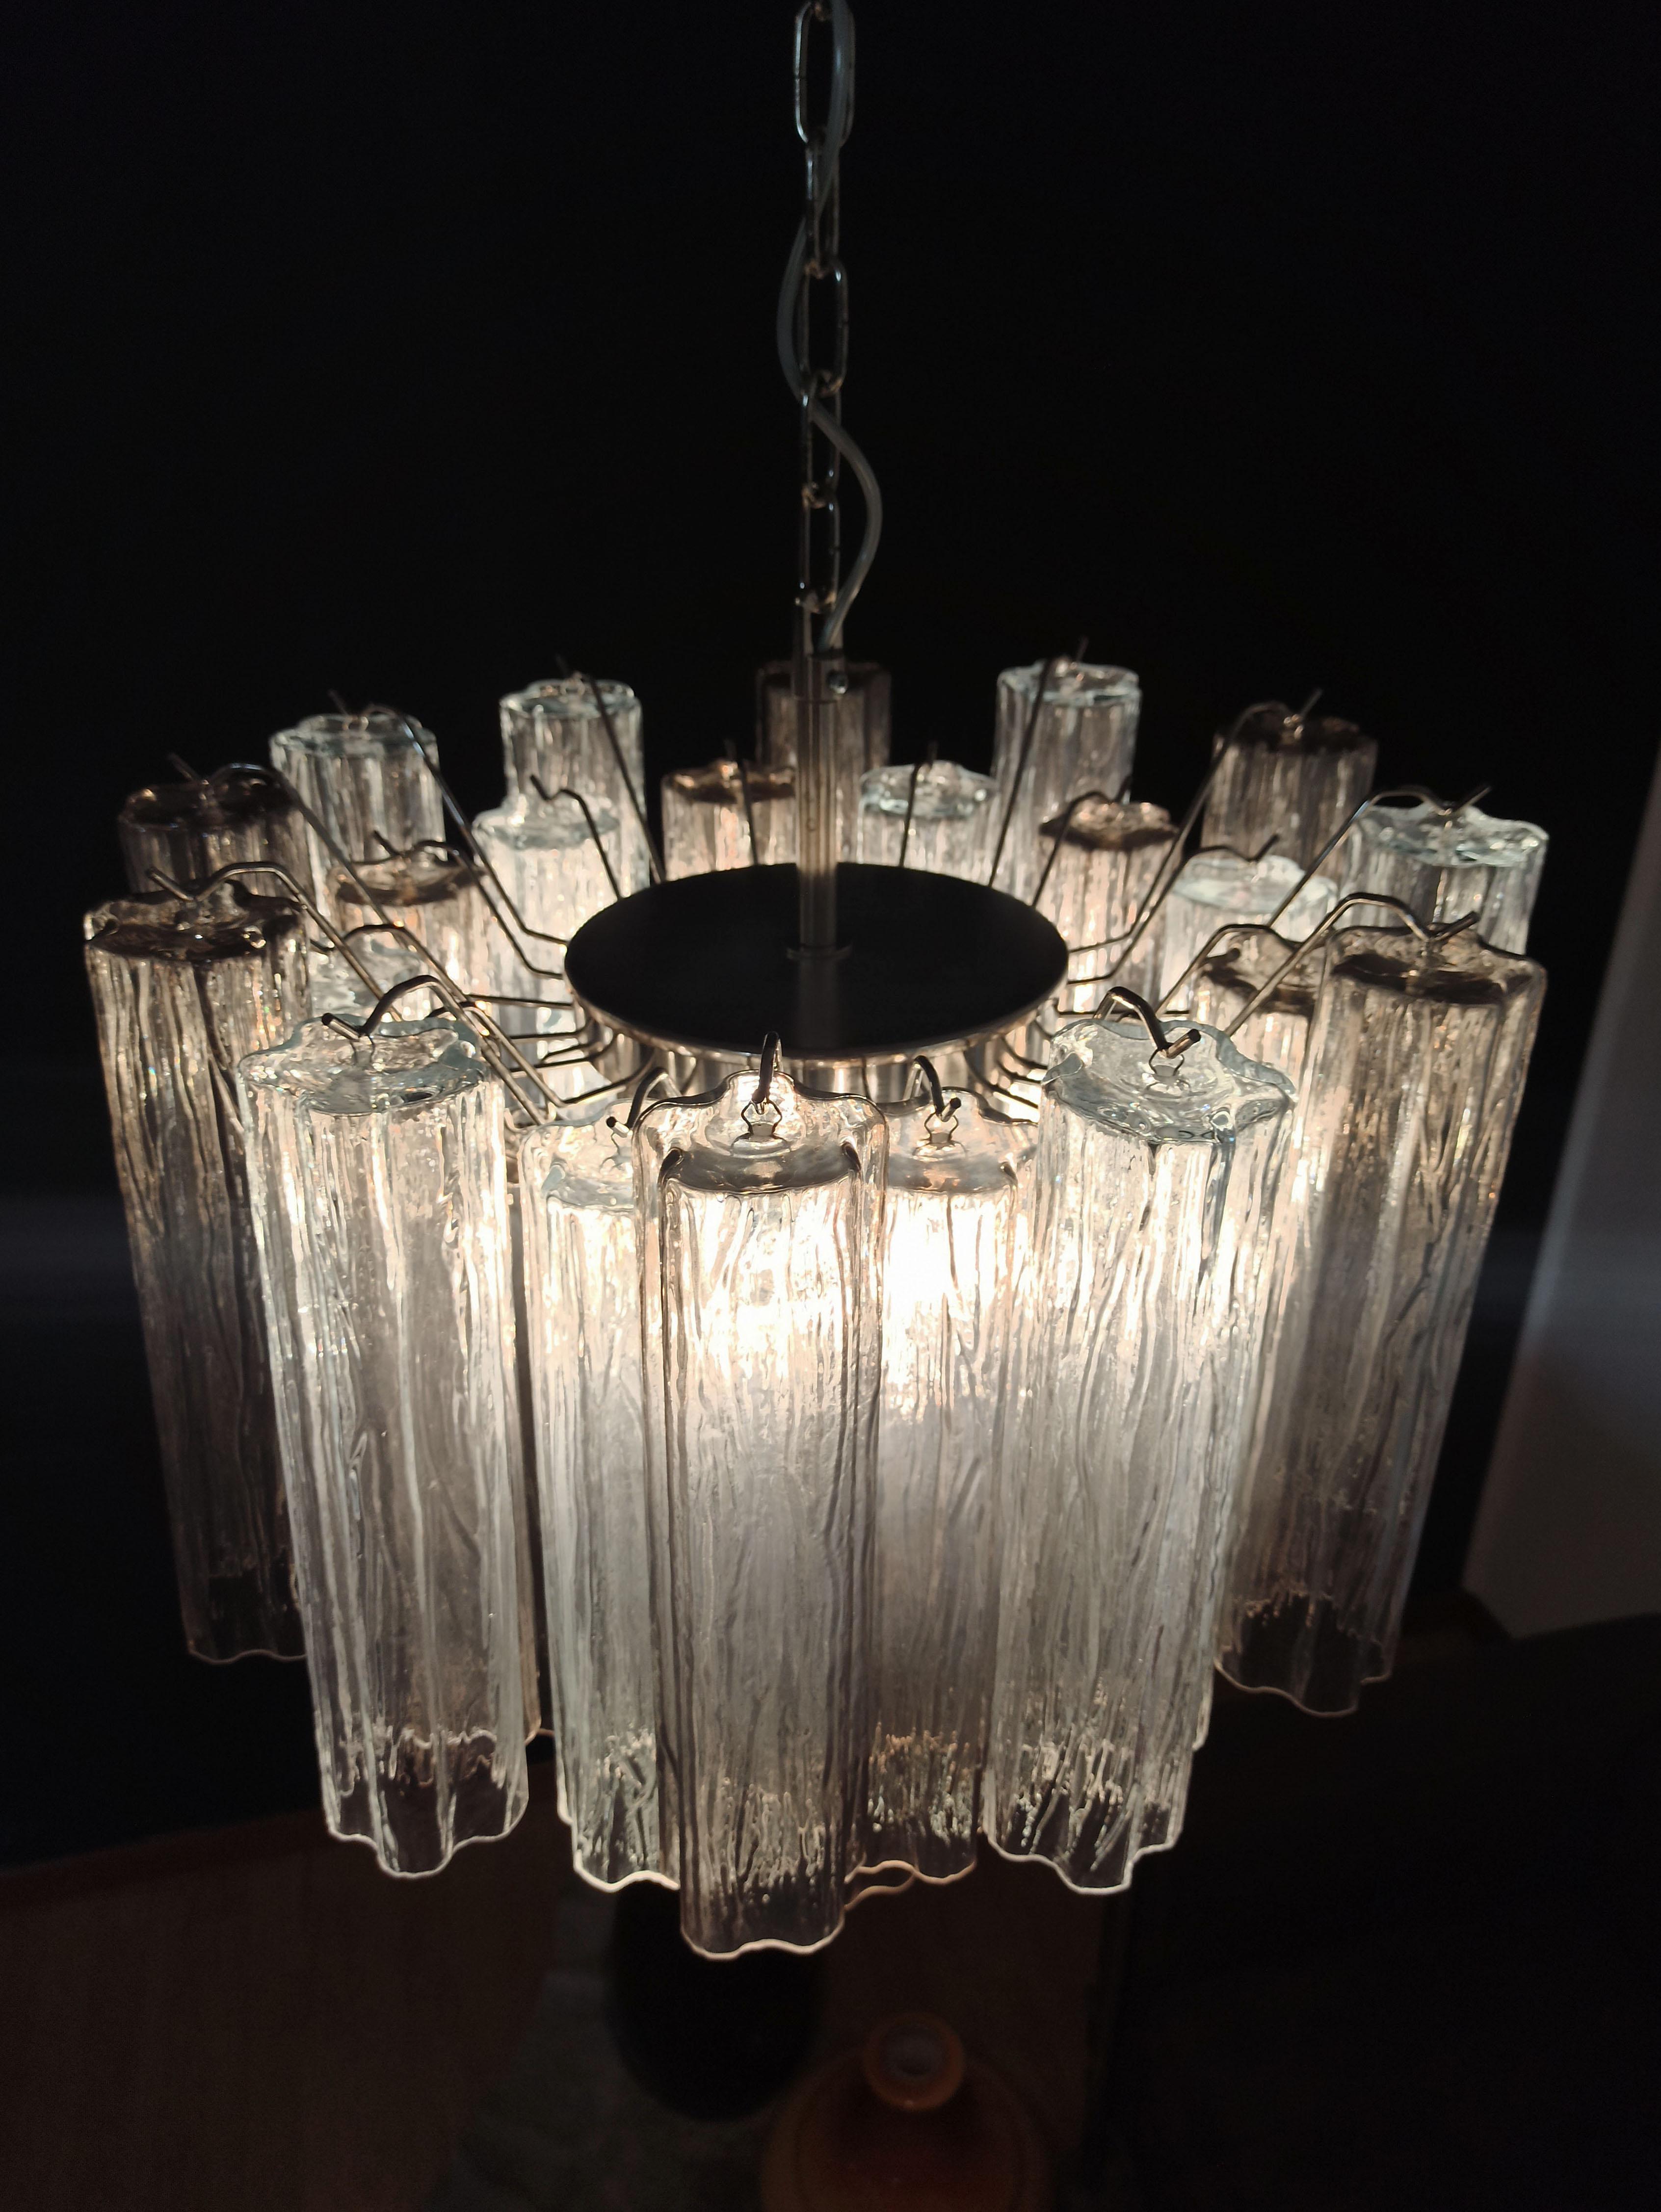 Fantastic Murano Glass Tube Chandelier - 36 smoked and clear glass tube For Sale 5